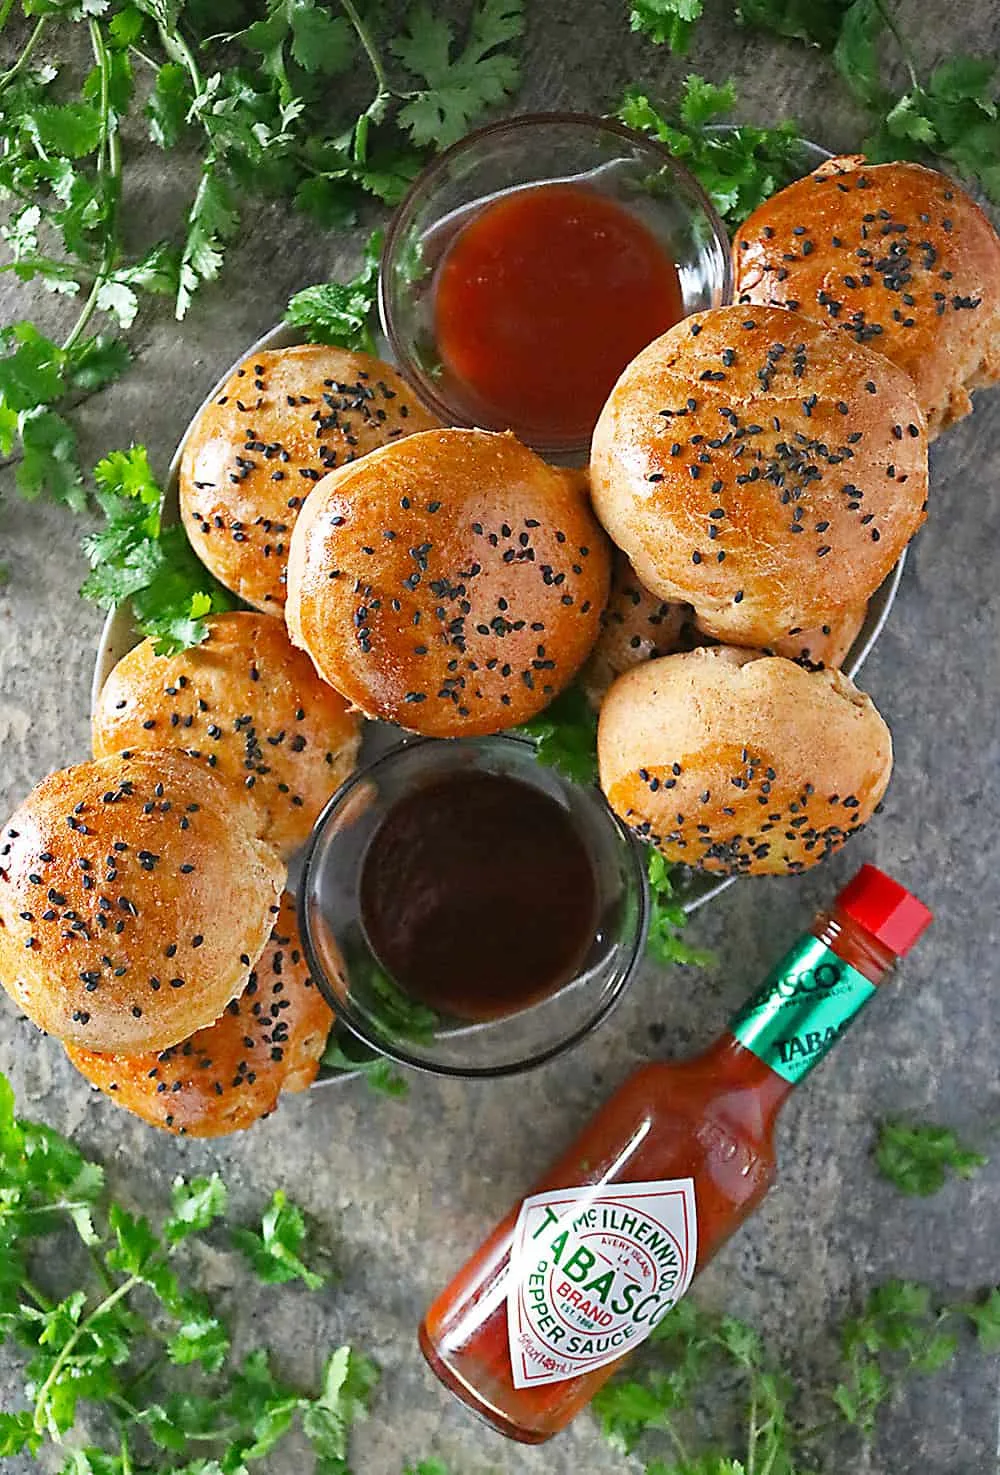 Curried Chicken Stuffed Buns With Tabasco Photo